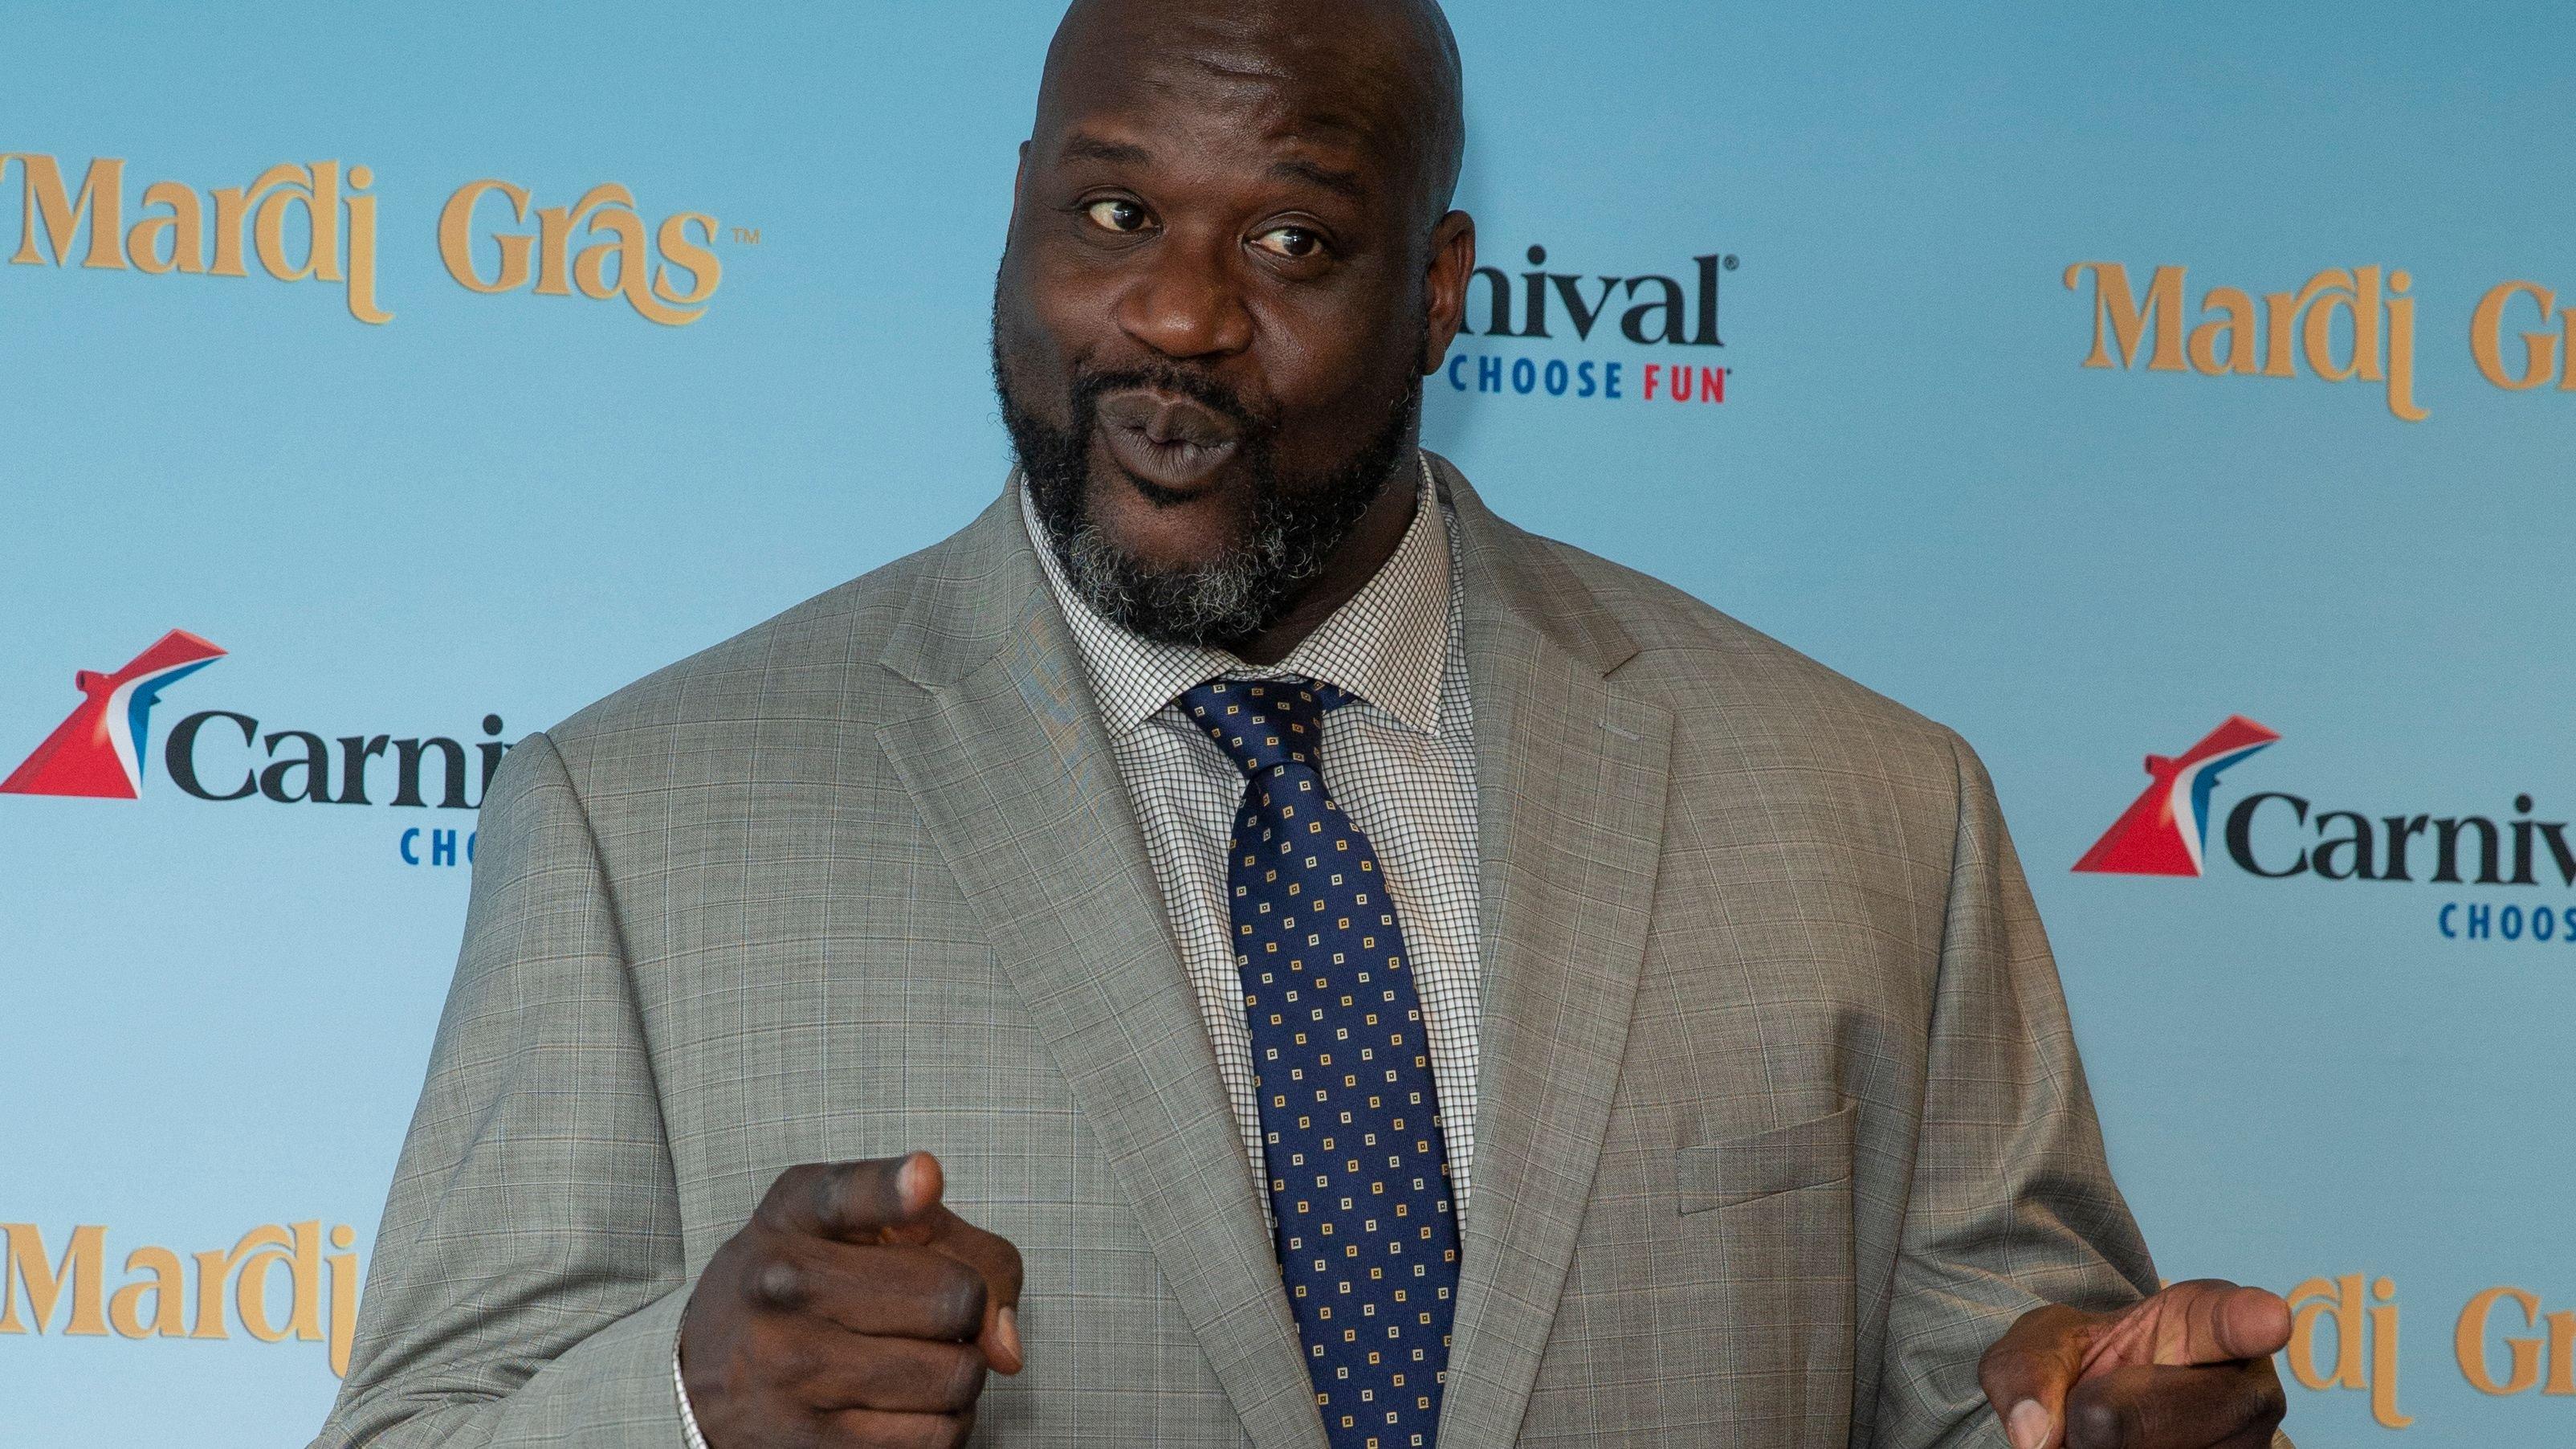 Shaquille O'Neal at an event in a grey suit pointing fingers at cameras